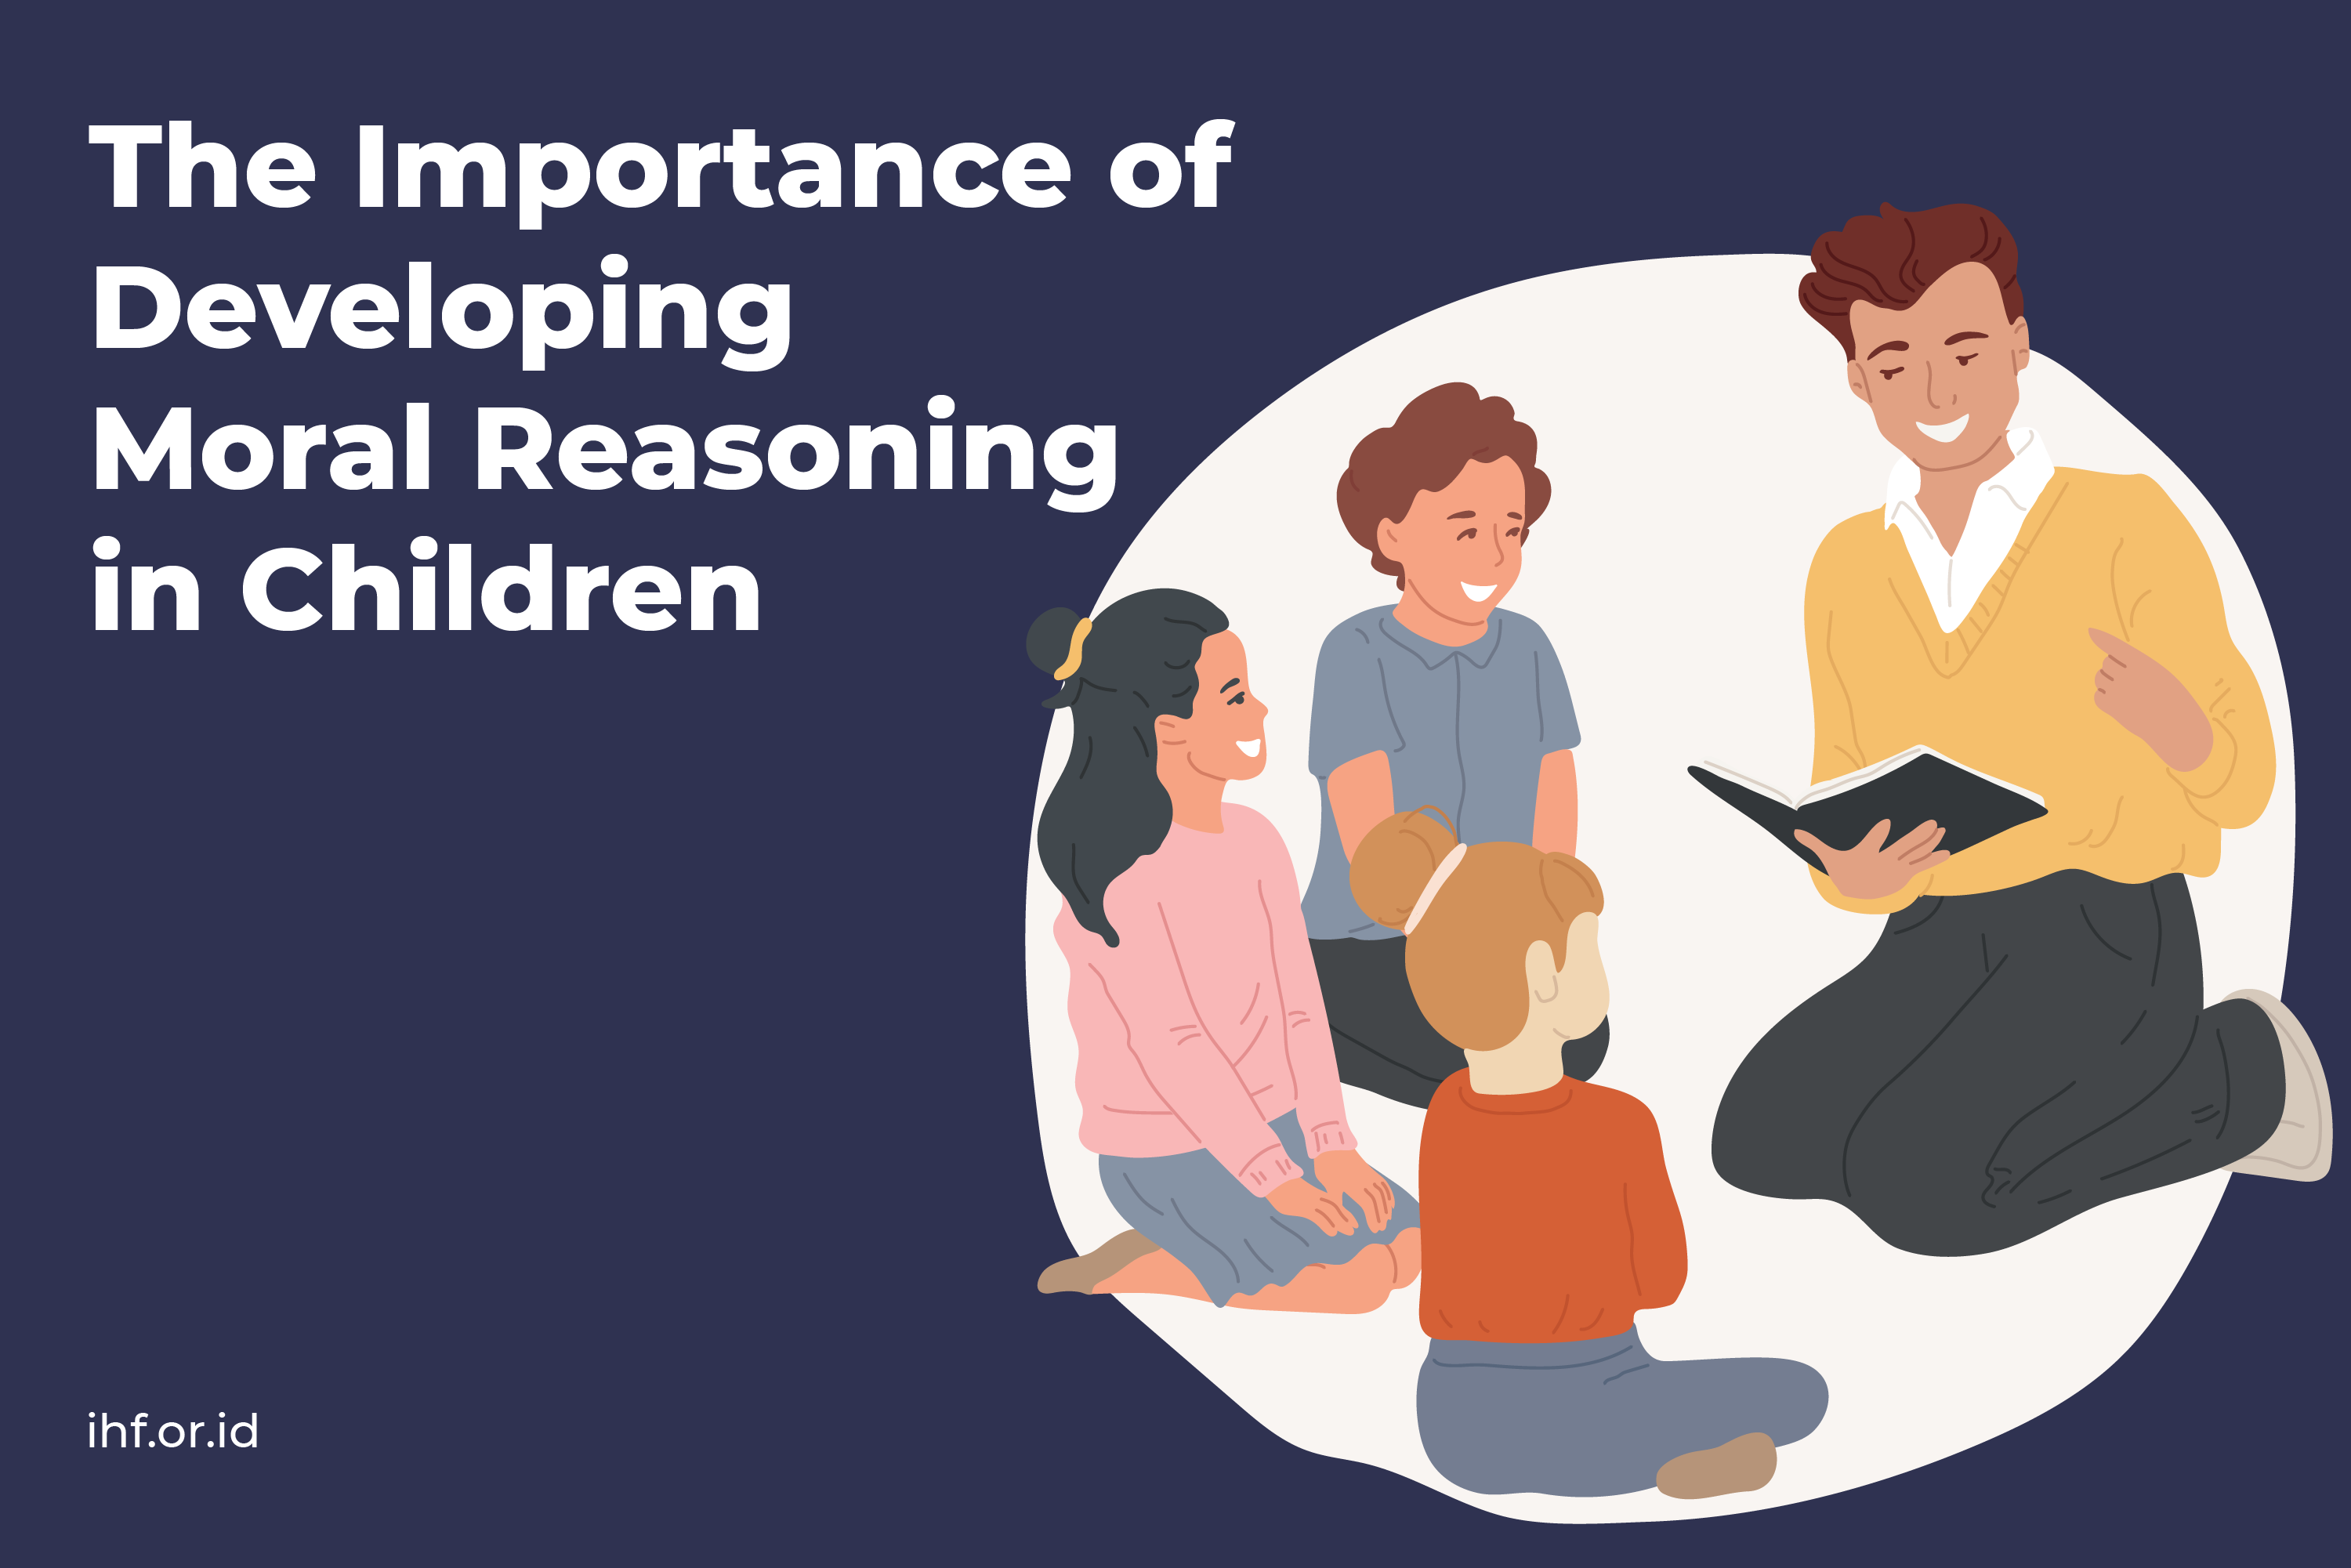 The Importance of Developing Moral Reasoning in Children